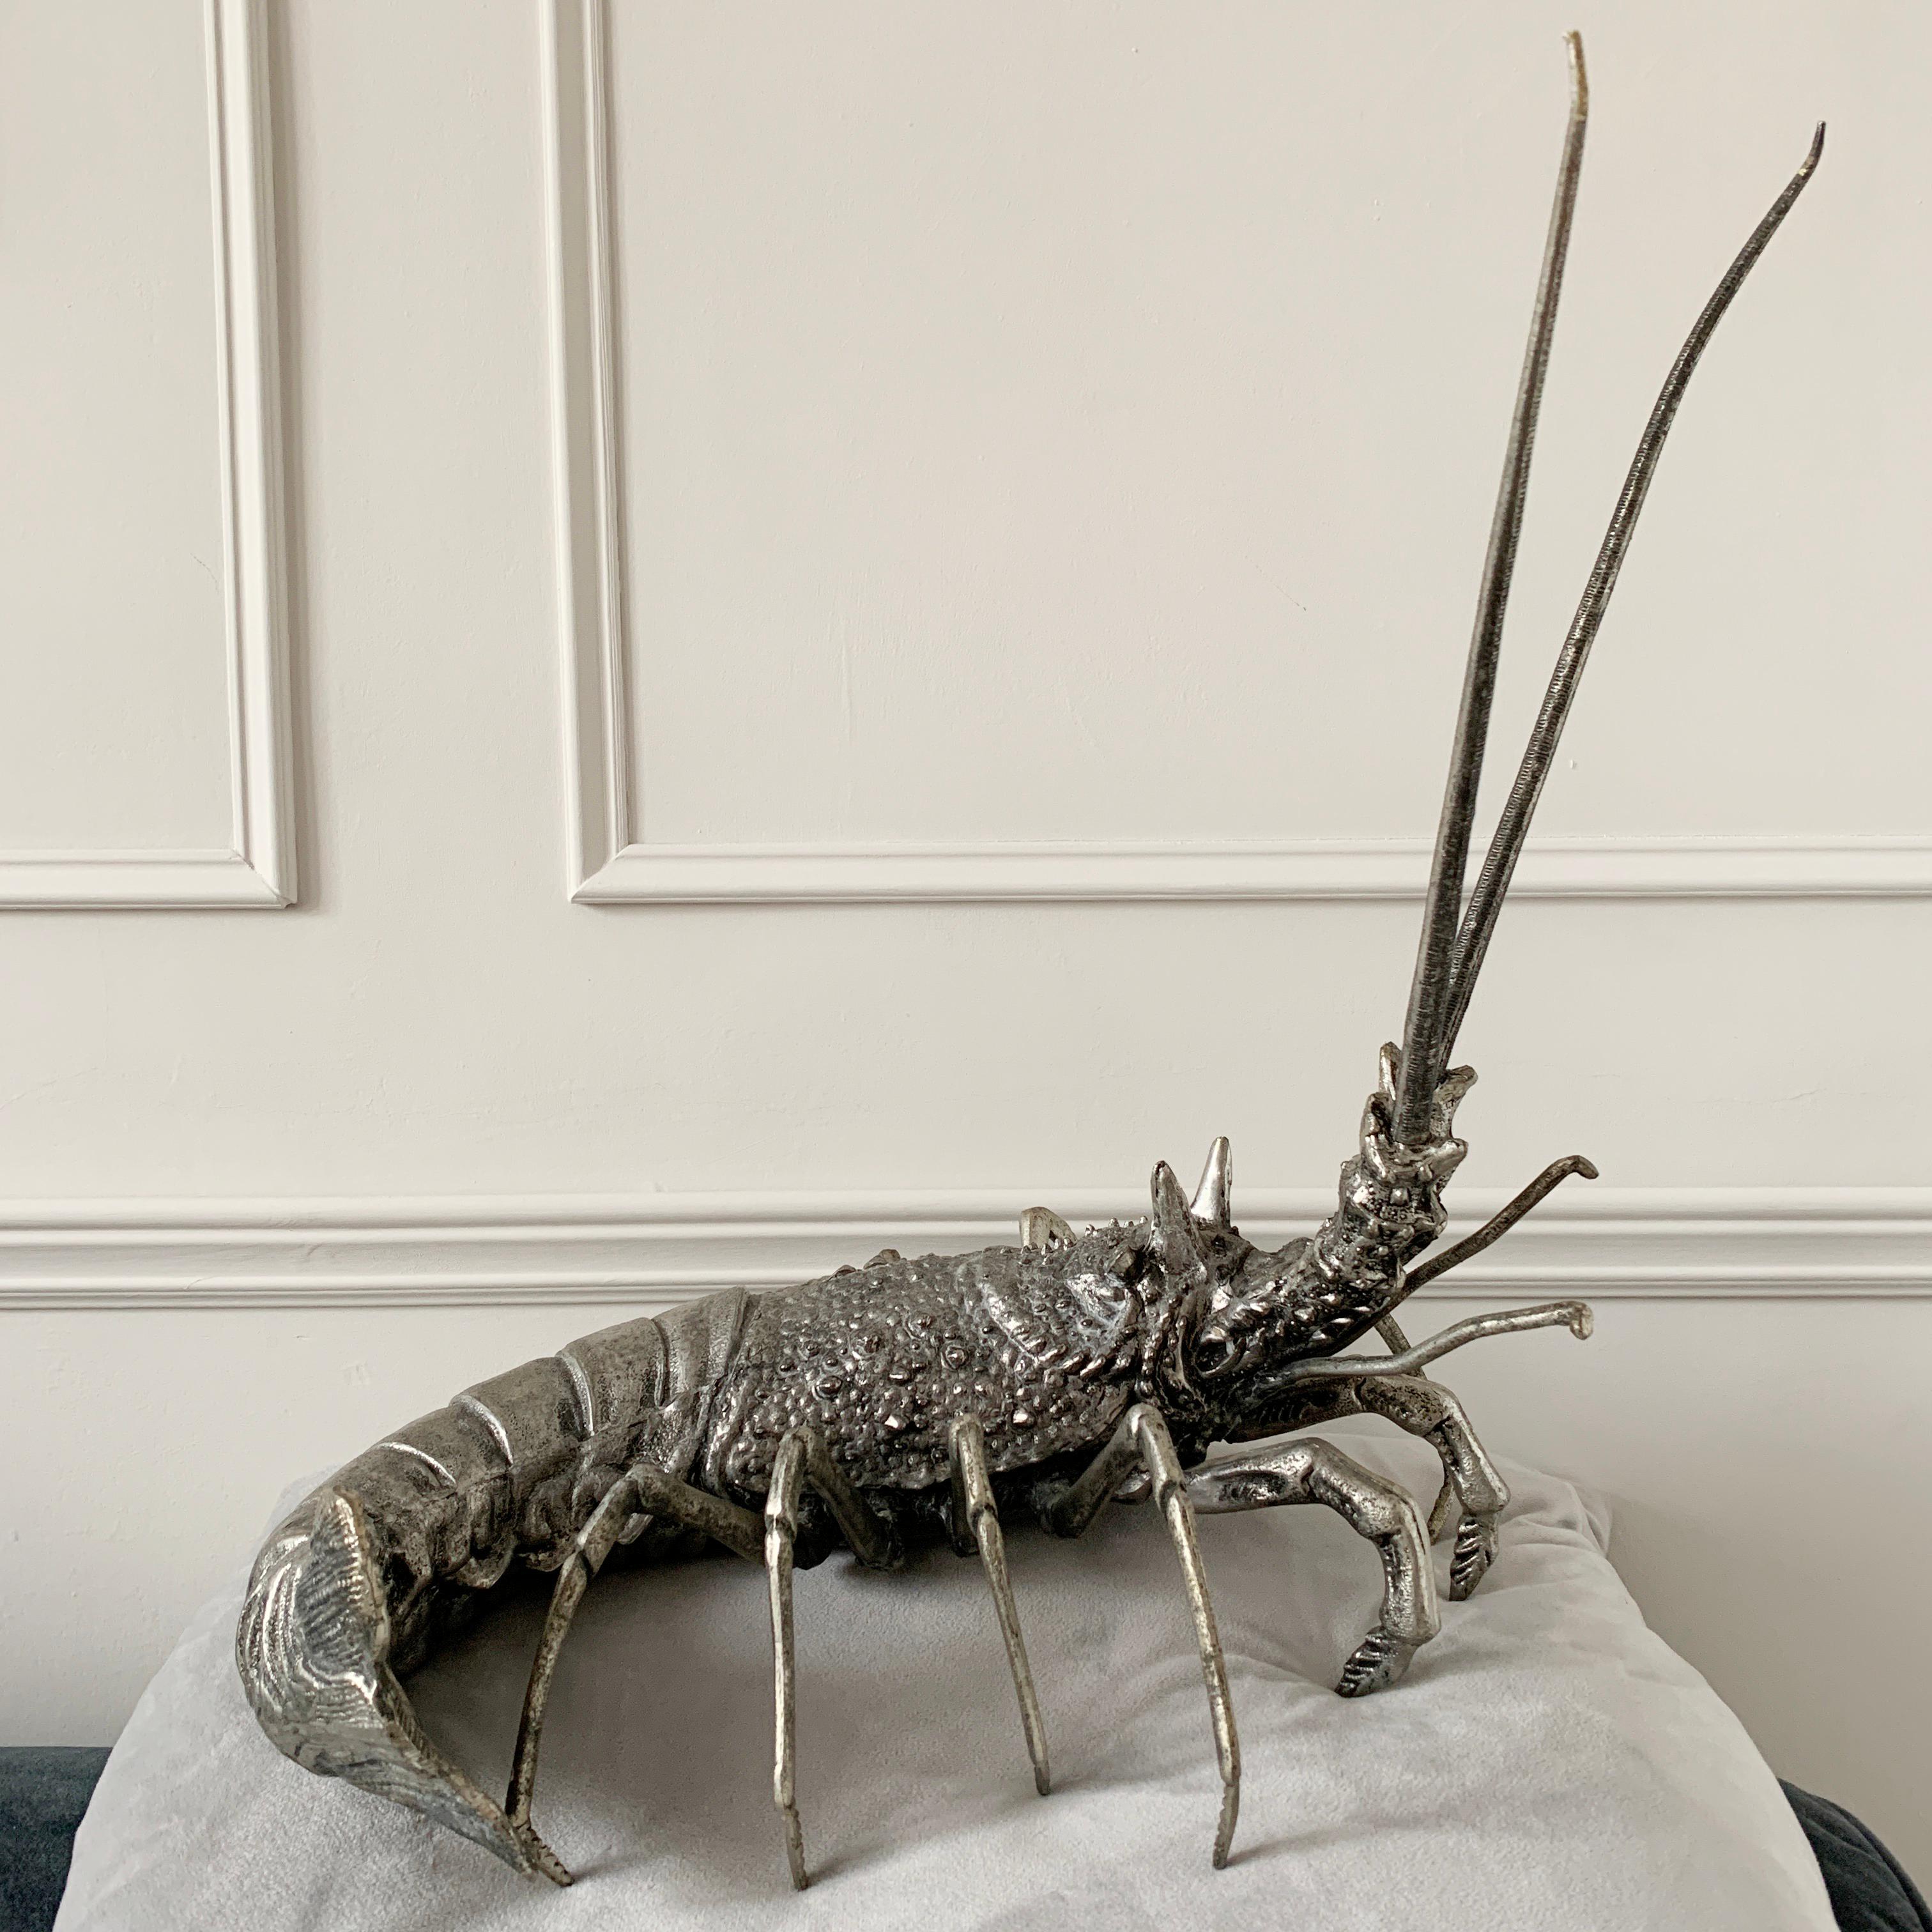 Mauro Manetti large lobster sculpture
Pewter
Italy, 1950s-1960s
The lobster still has its high shine silver finish it has both its original antennae
It is stamped on the underside with the Classic ‘ M M’ Mauro Manetti, Italy, Firenze, Peltro